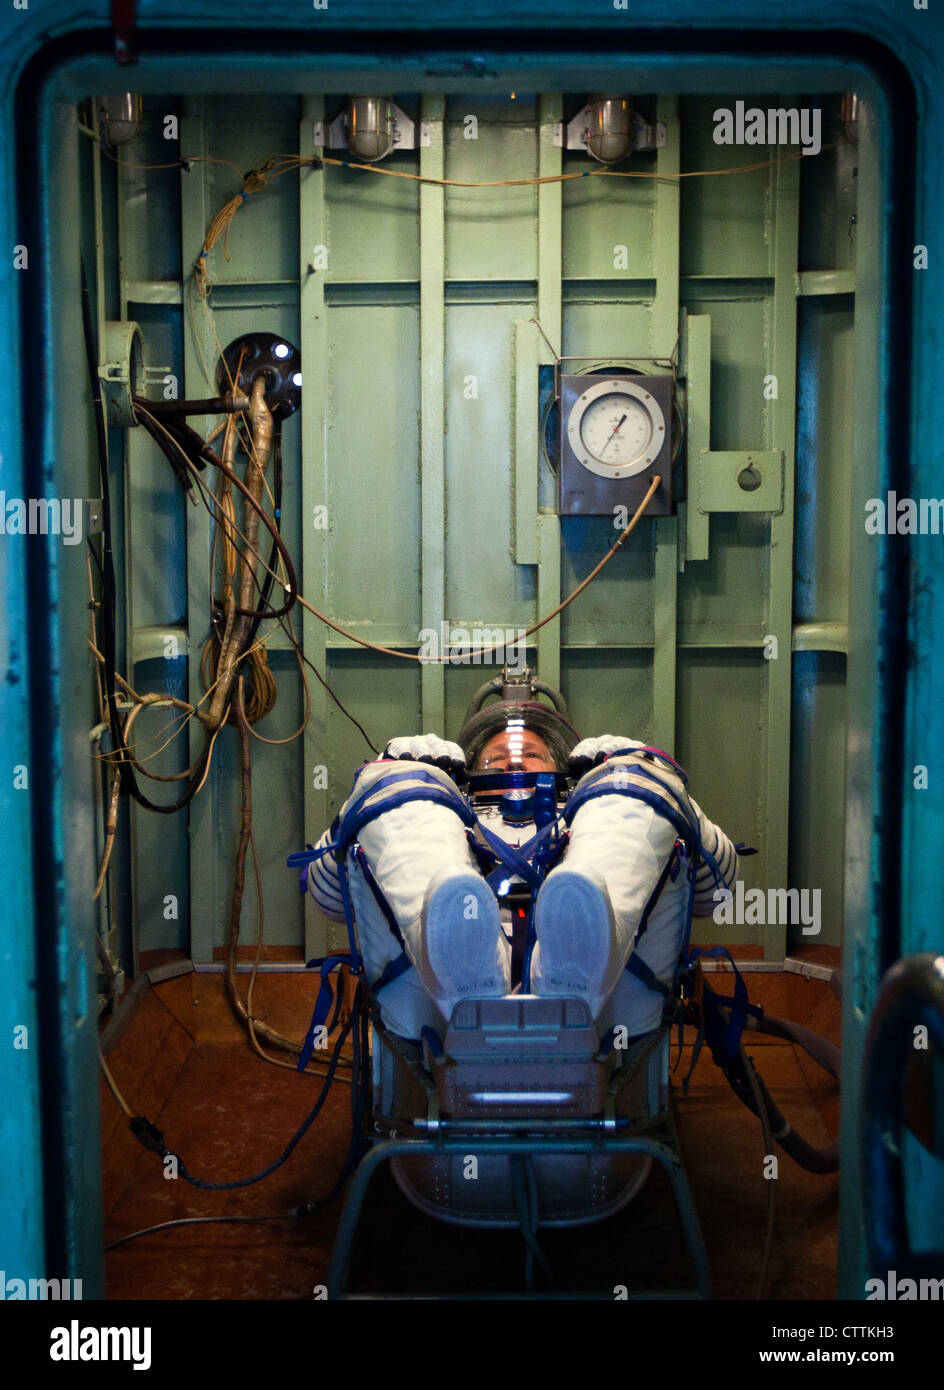 NASA astronaut Doug Hurley, STS-135 pilot, waits in a pressure chamber before a test of his Russian Sokol spacesuit at the Zvezda facility in Moscow on March 30, 2011. The crew of the final shuttle mission traveled to Moscow for a suit fit check of their Russian Sokol suits which would be required in the event of an emergency. Stock Photo